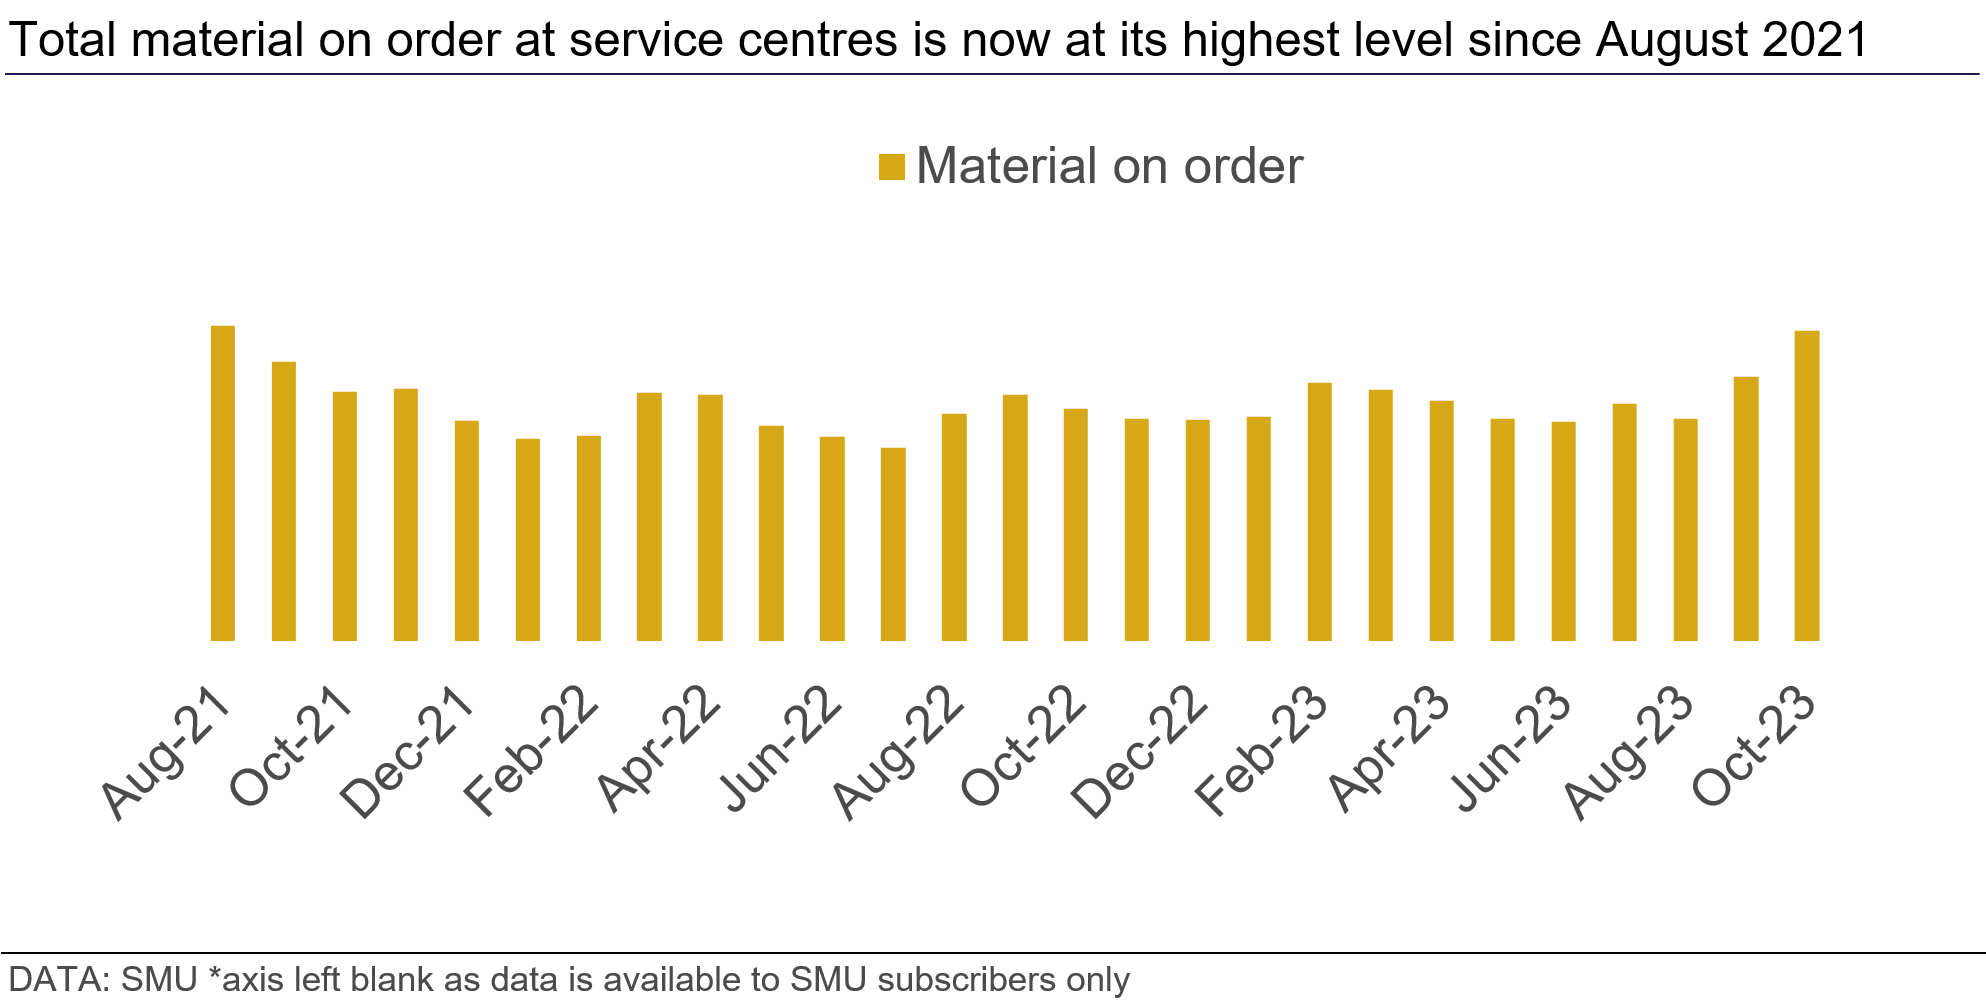 Graph showing that total material on order at service centres is now at its highest level since August 2021